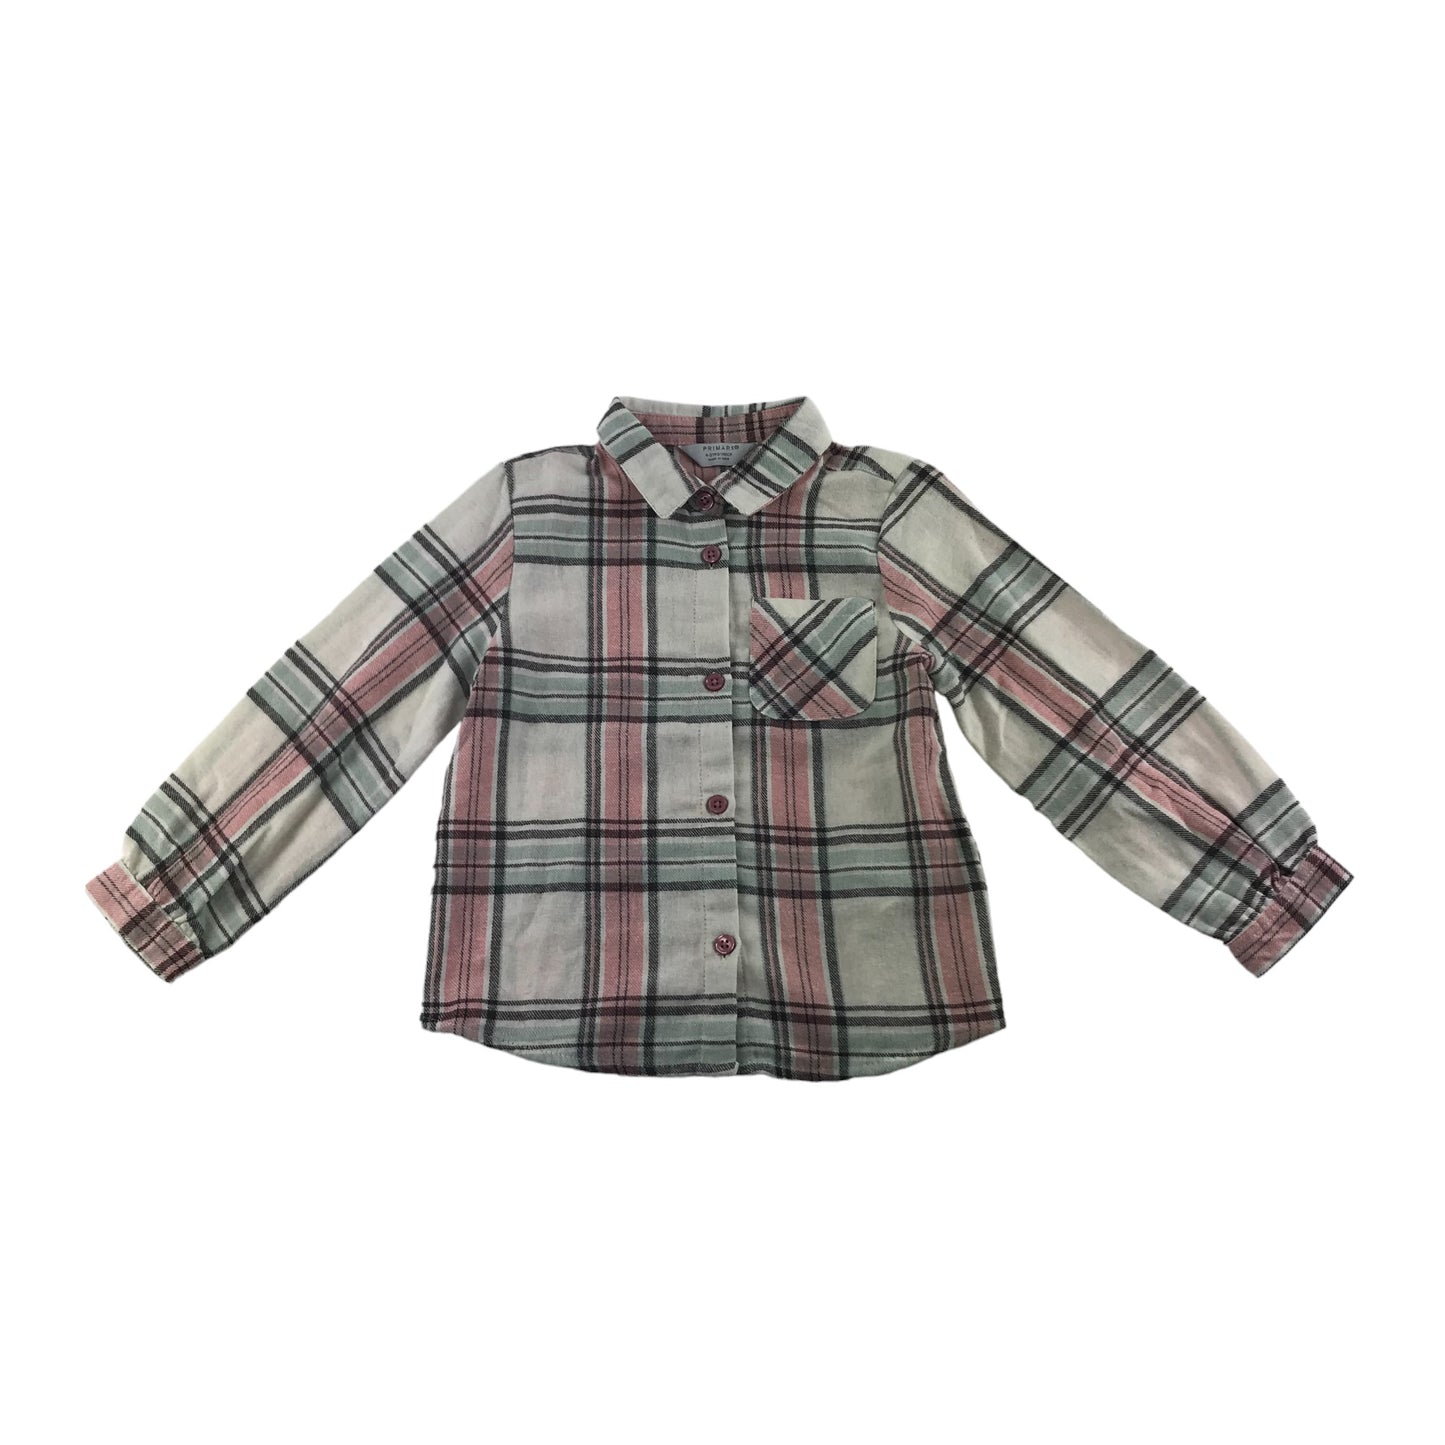 Primark Shirt Age 4 Pink white Checked Long Sleeve Button Up Cotton